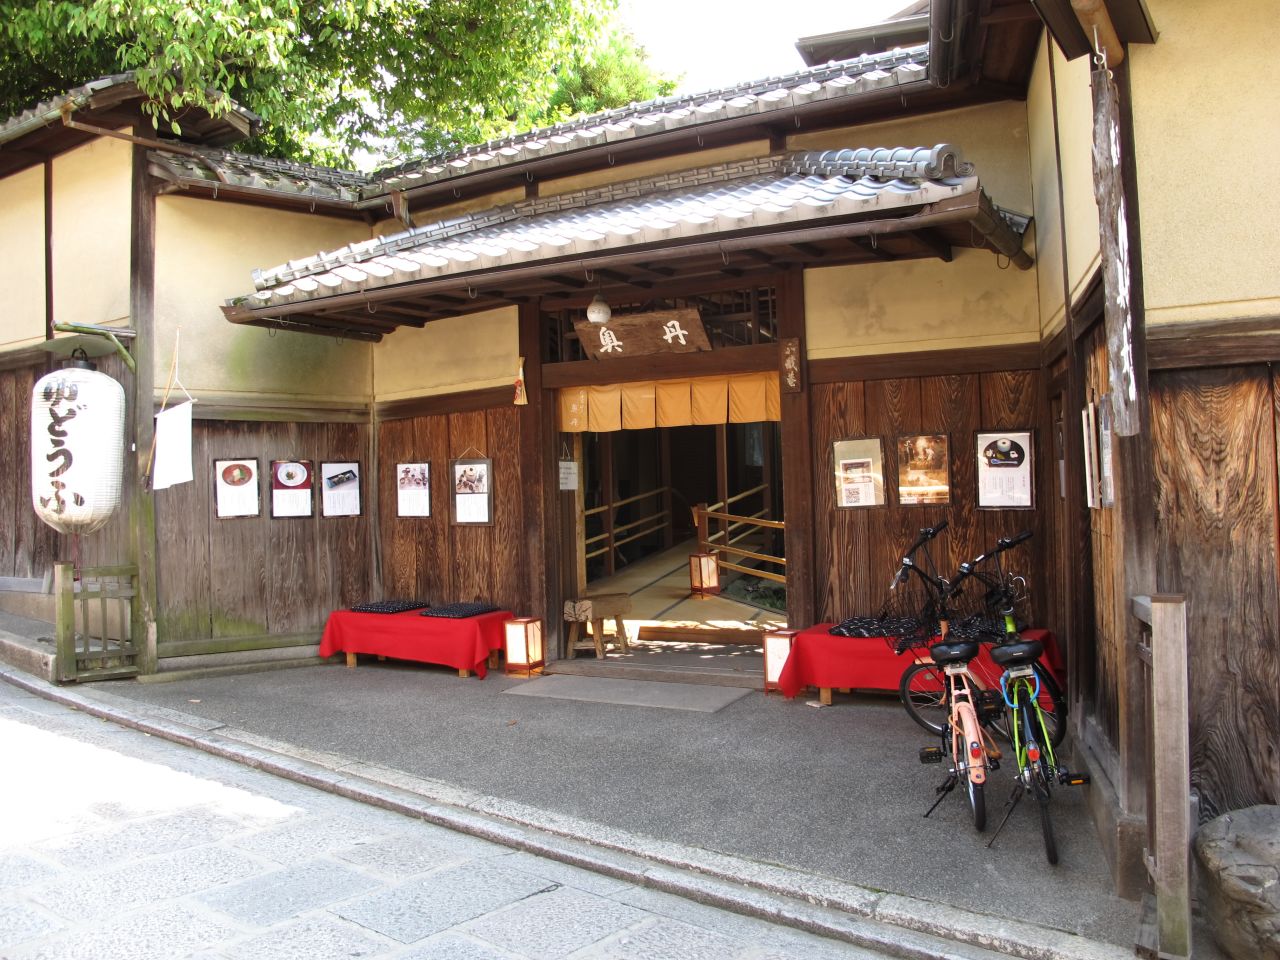 Okutan restaurant is in the heart of scenic Higashiyama, one of the city's best preserved historic districts.